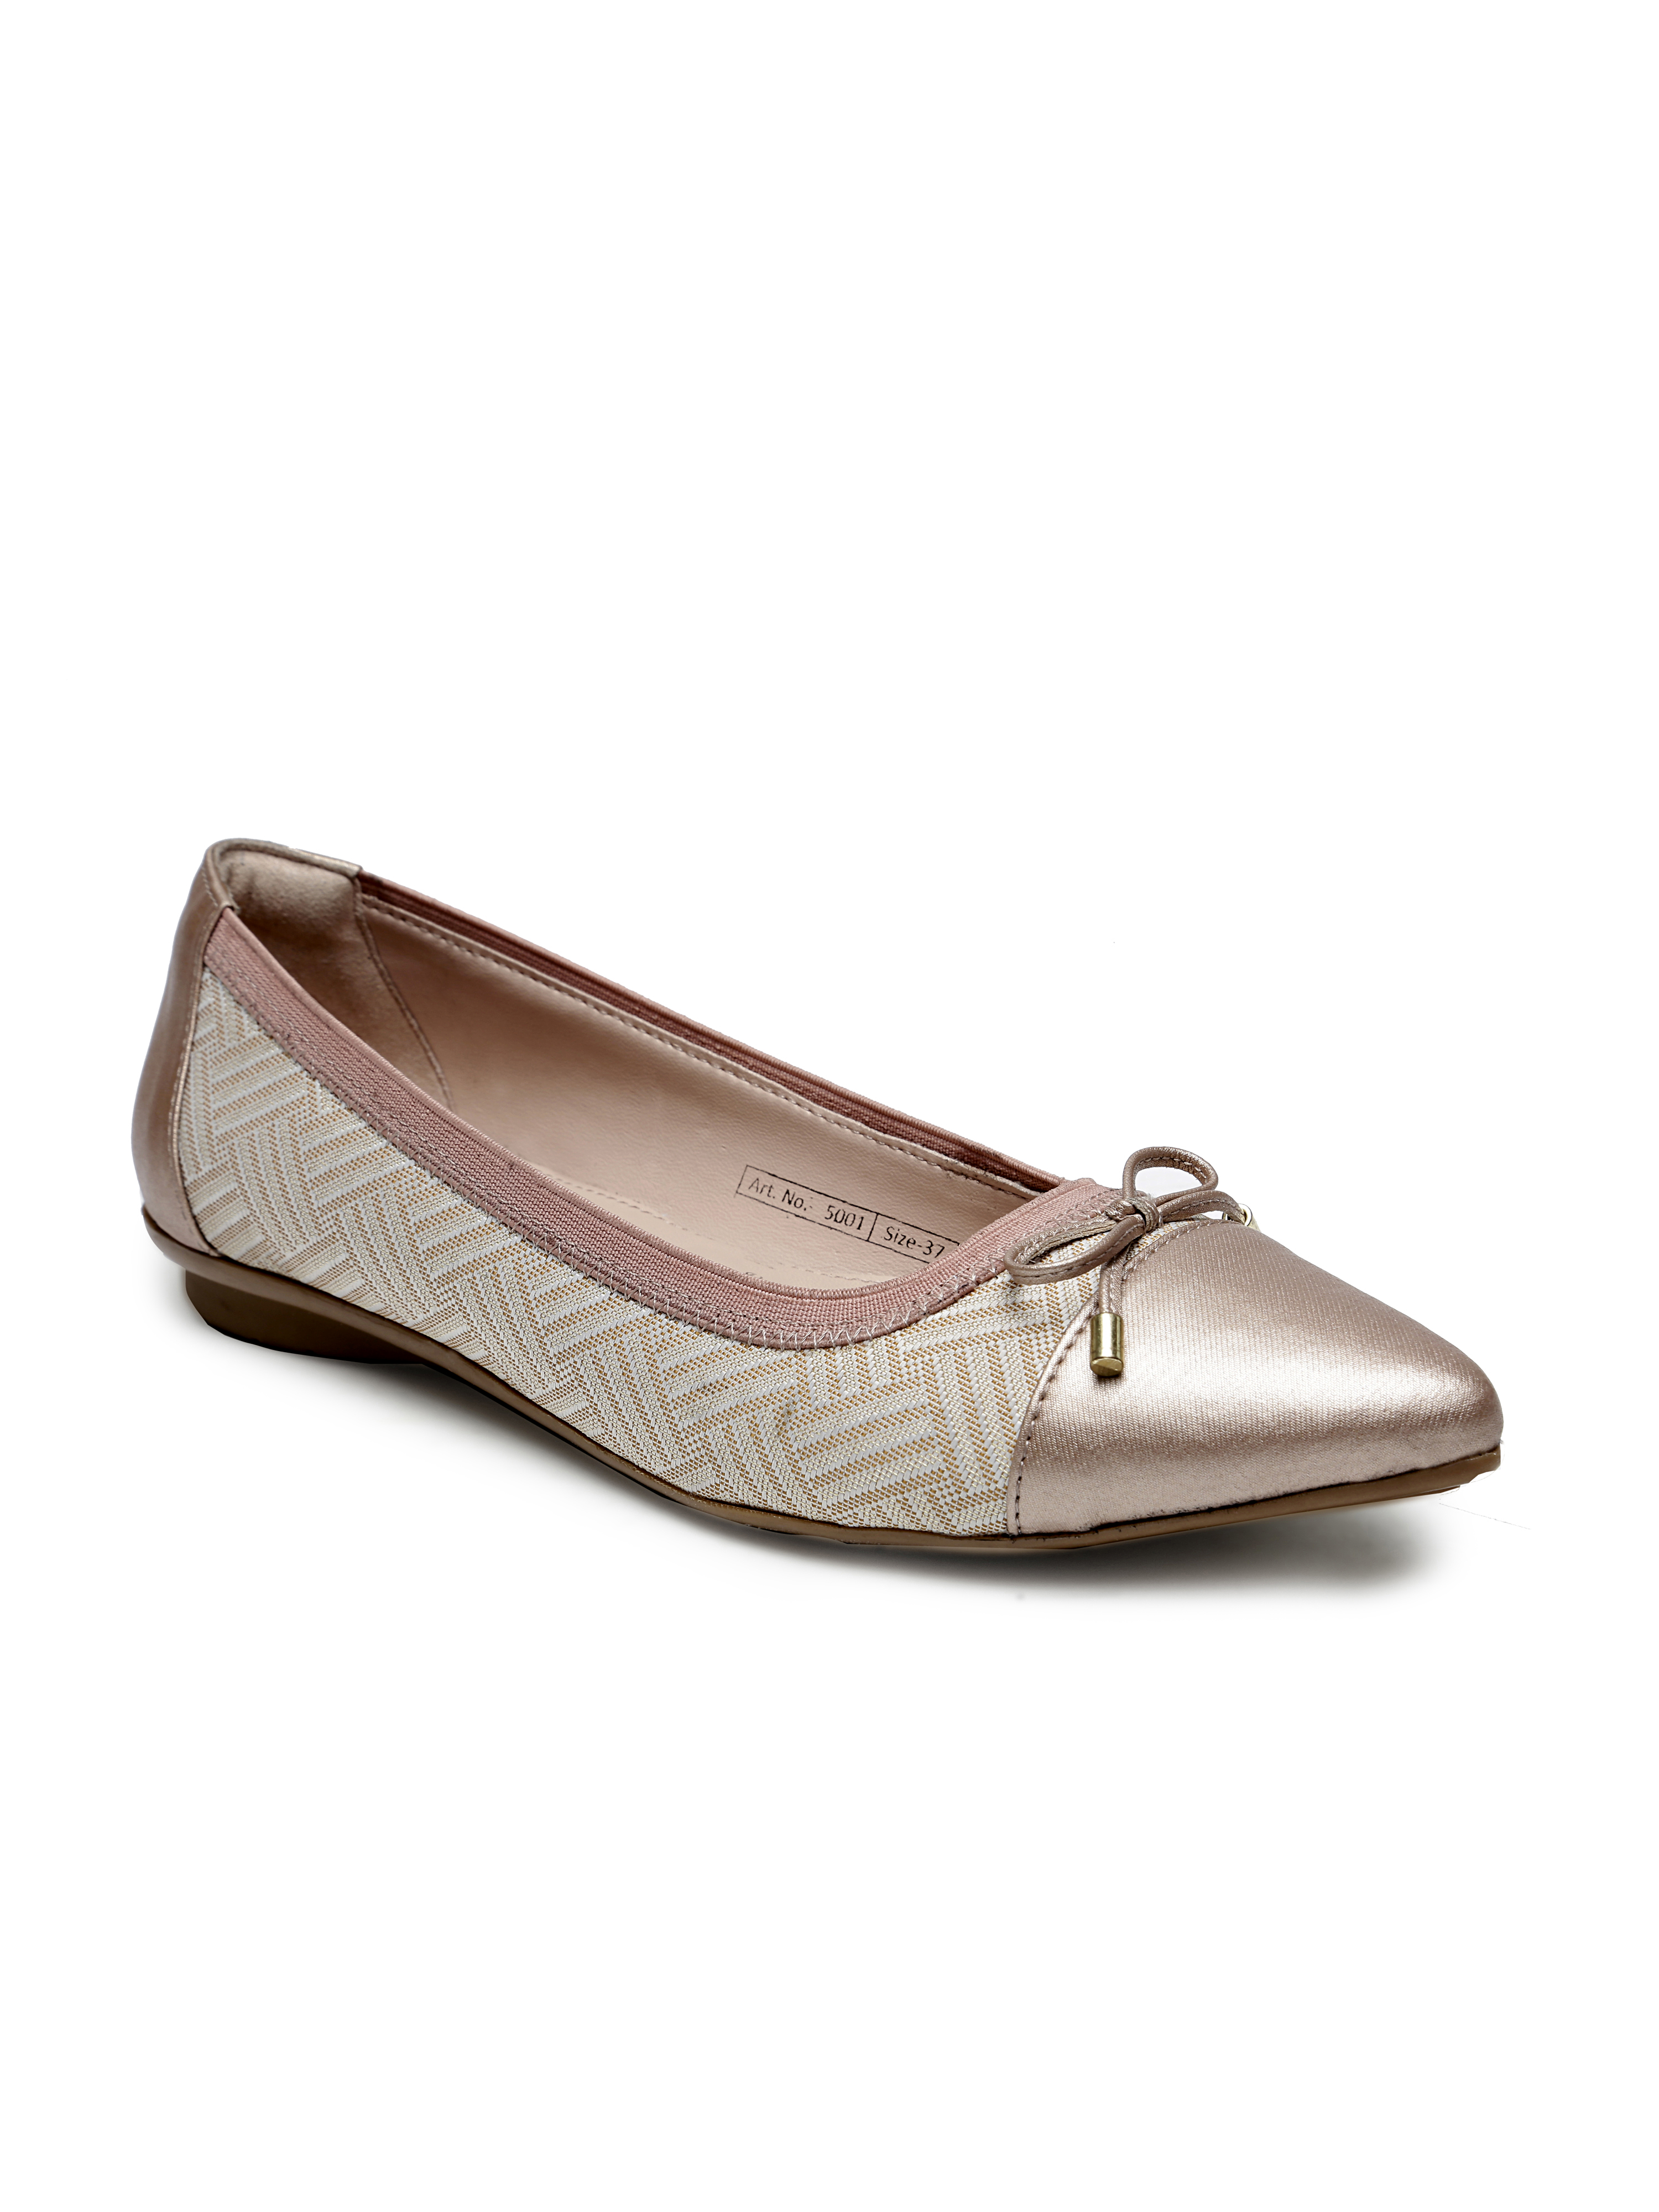 Buy Von Wellx Germany Comfort Women's Peach Casual Shoes Lisa Online in Indore